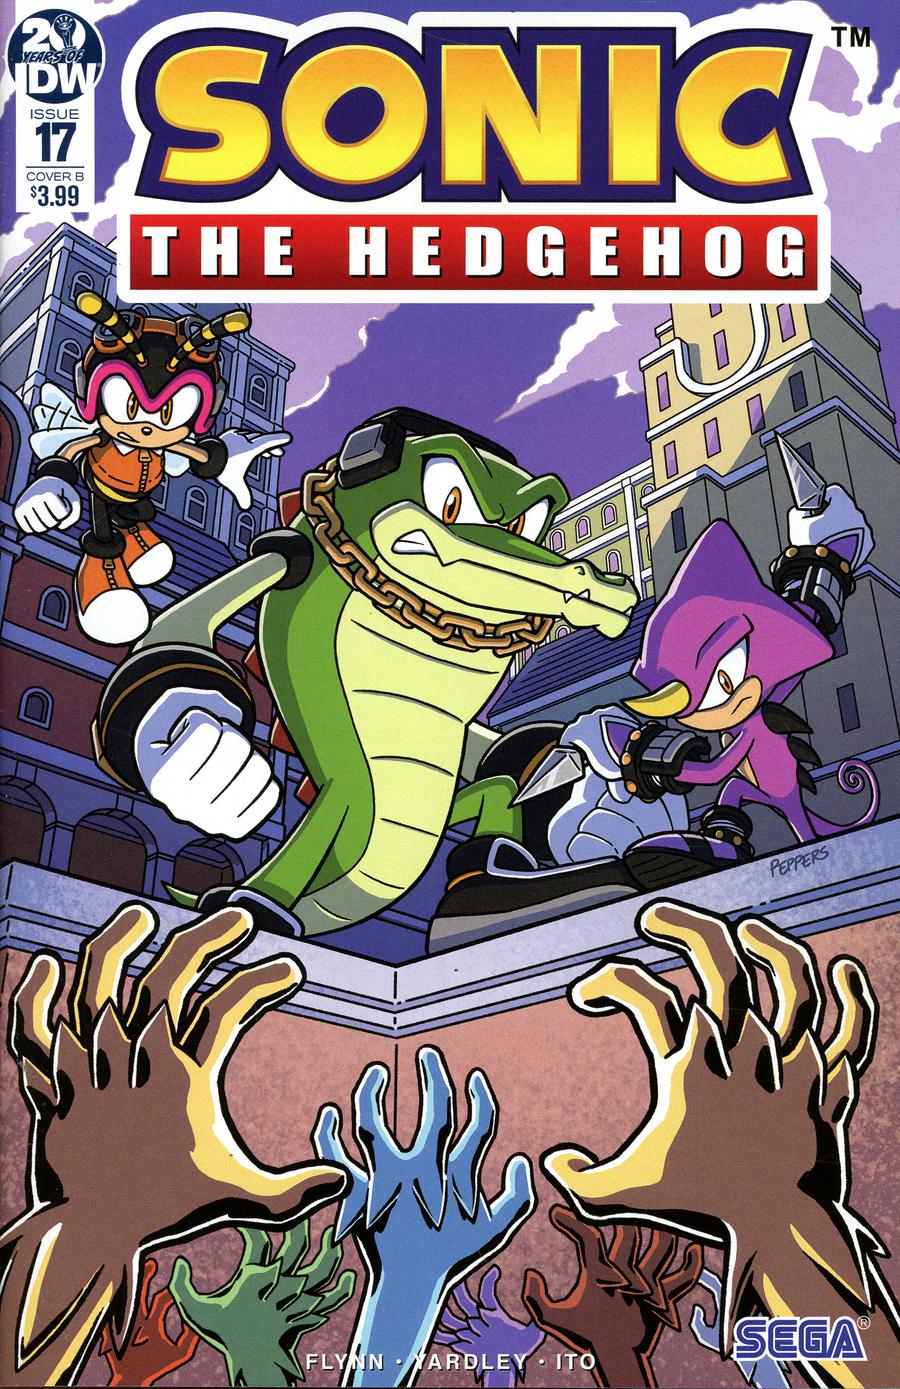 Sonic The Hedgehog Vol 3 #17 Cover B Variant Jamal Peppers Cover